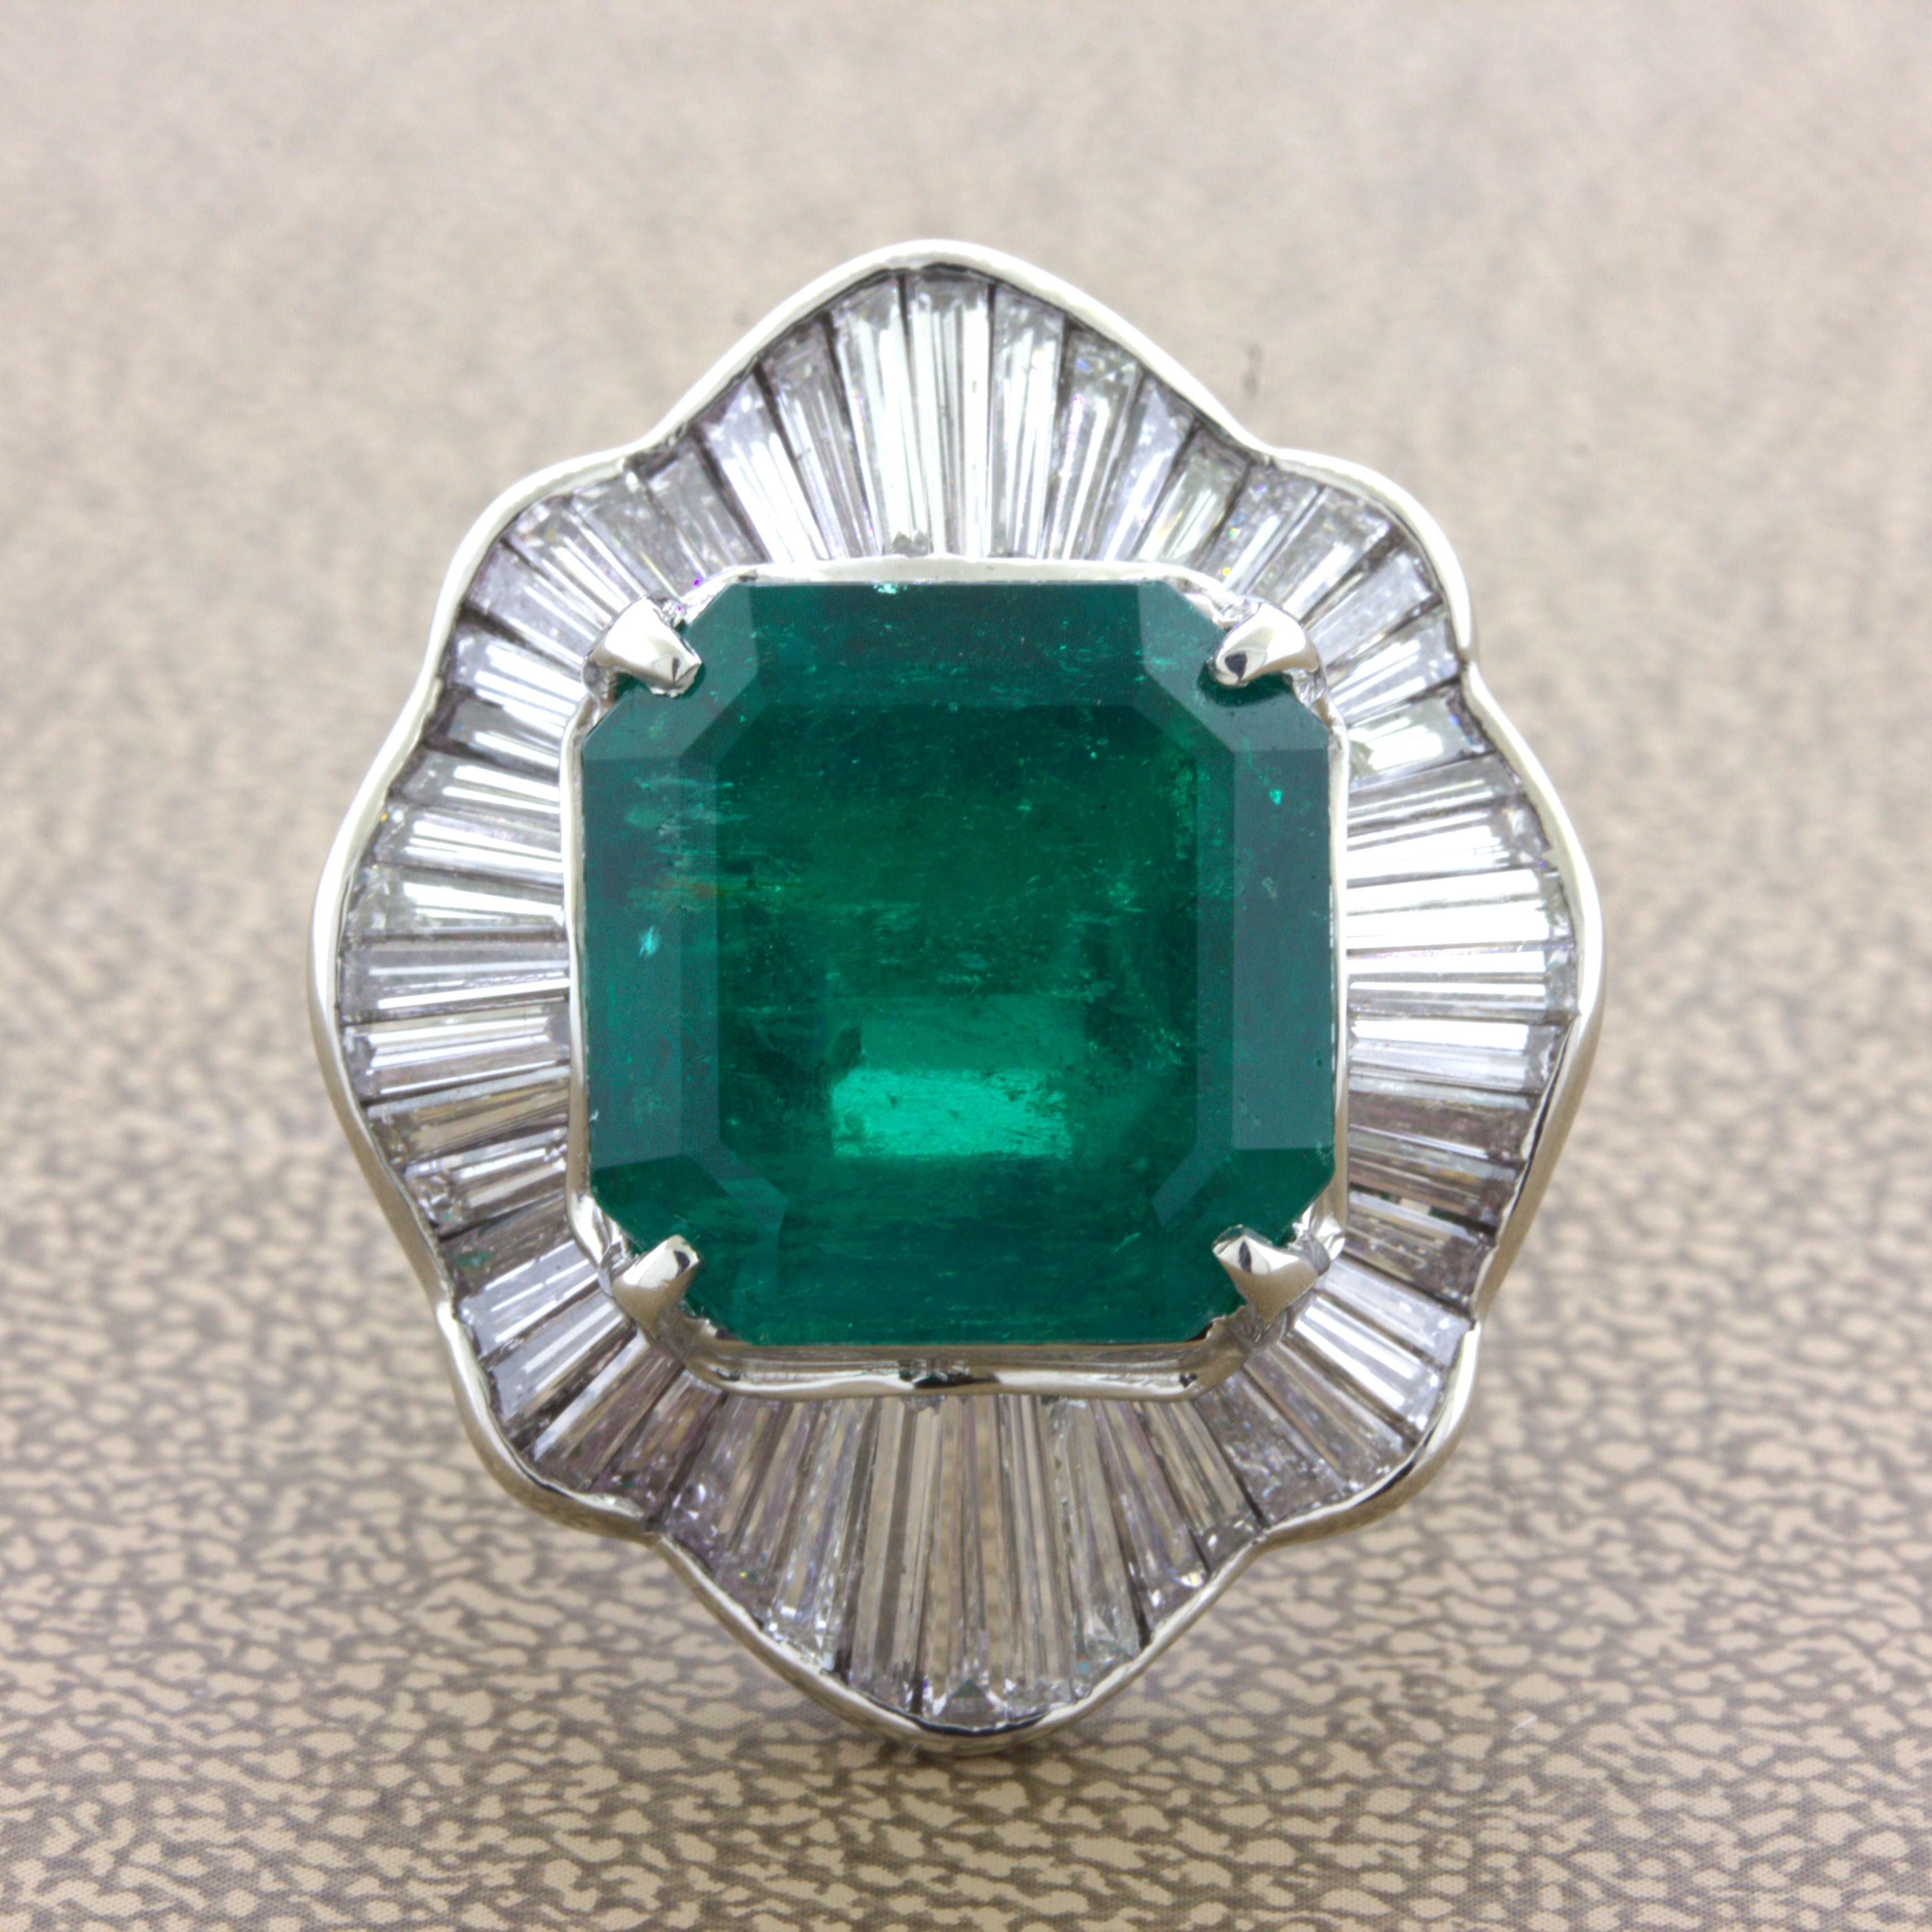 A rich and intense vivid green emerald certified by the GRS as “Muzo type” meaning it most likely originated from the famous emerald mines of Muzo, Colombia which has produced the finest emeralds for the past 300 years. It weighs a very impressive